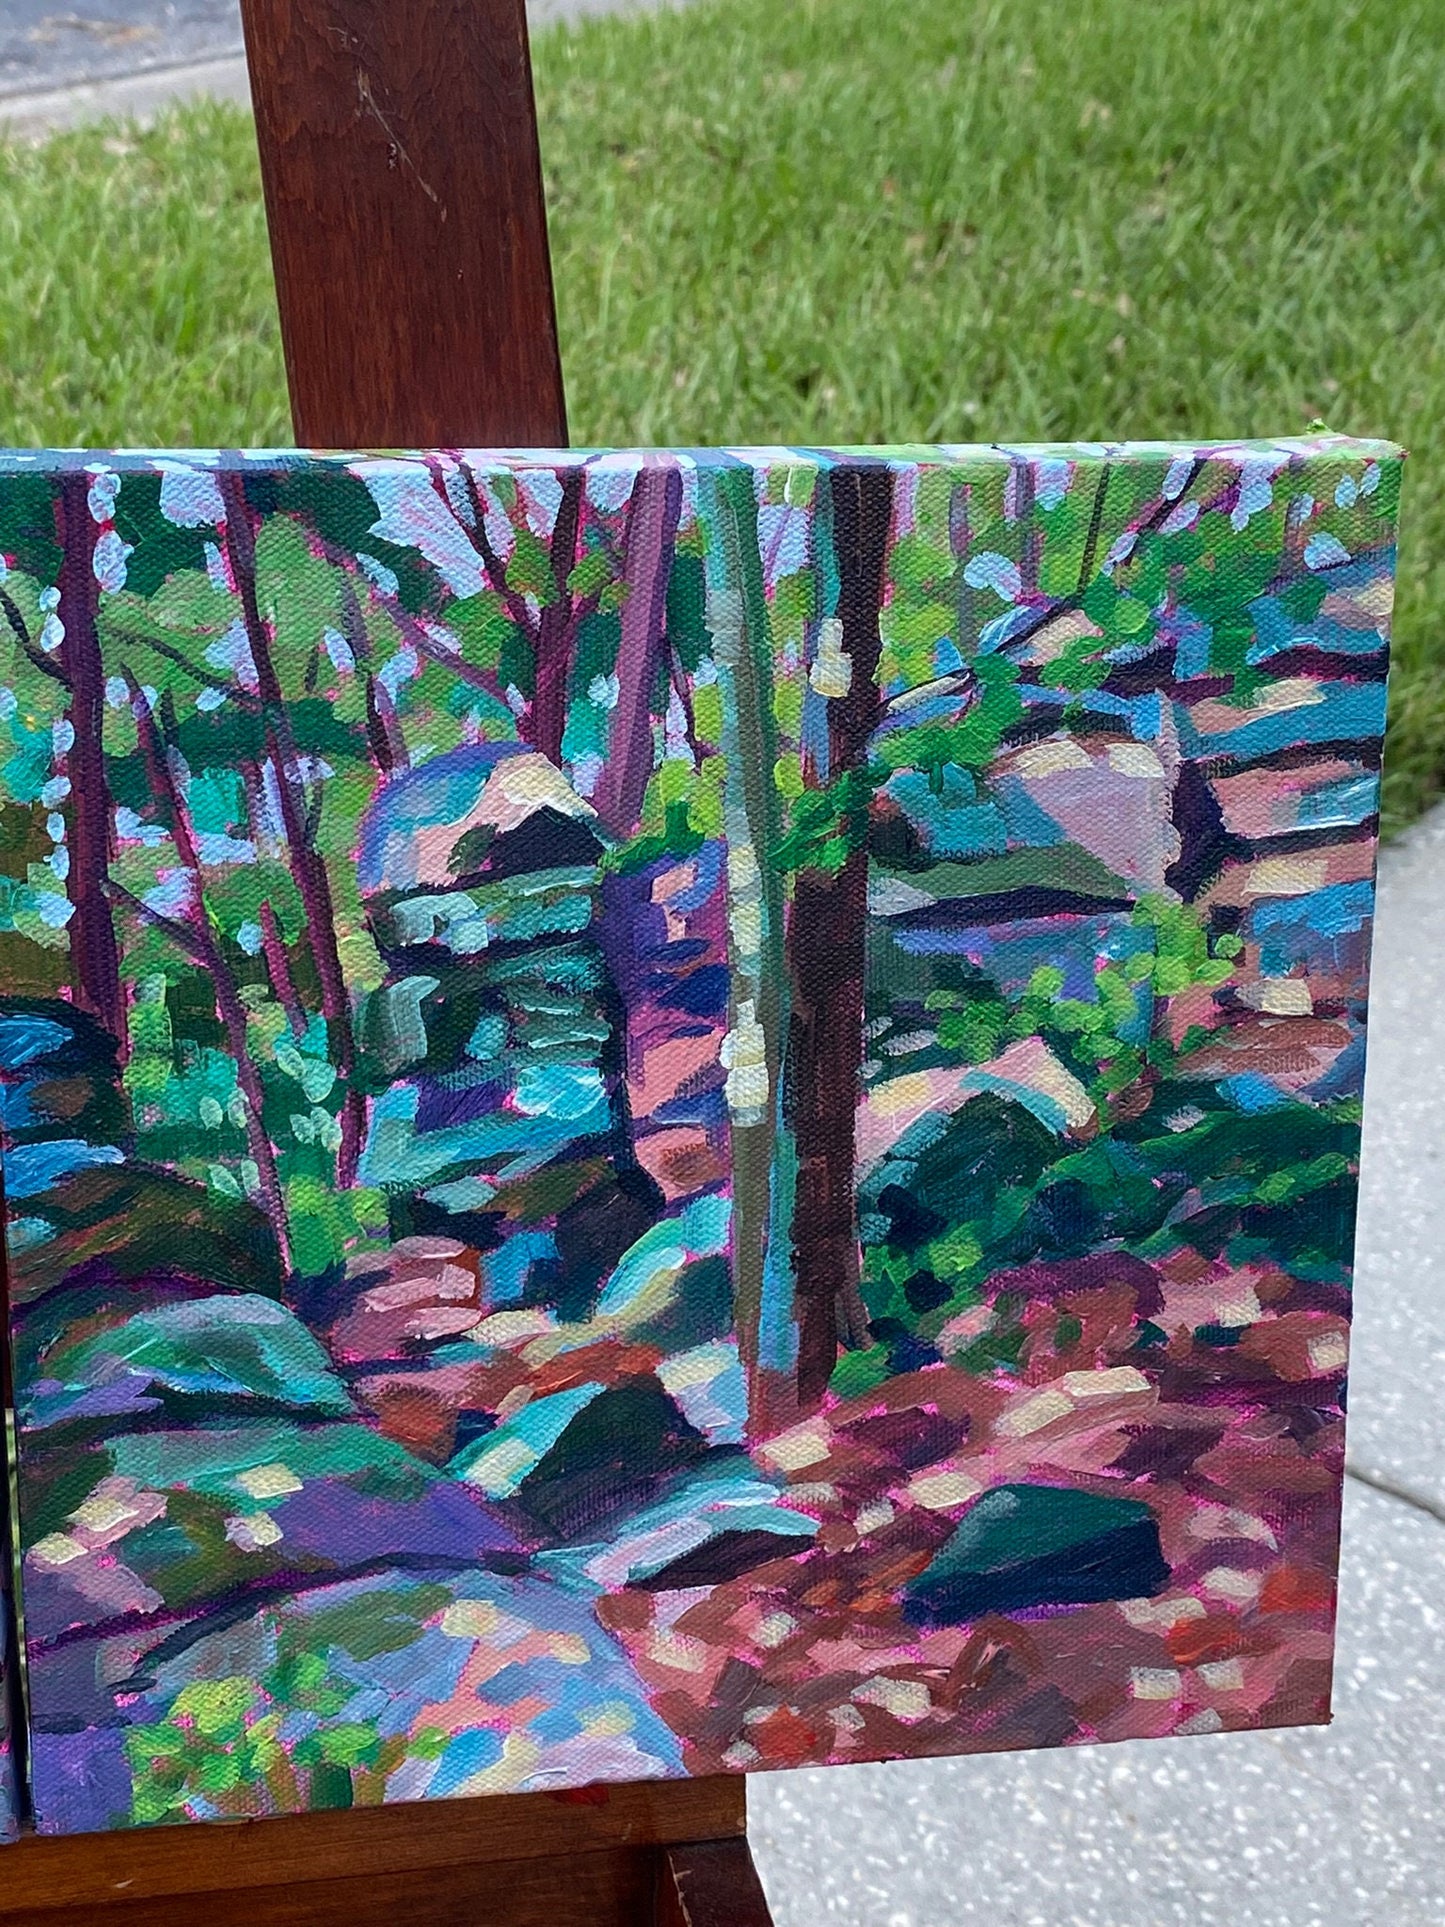 outdoor view on easel of Cuyahoga Ledges painting